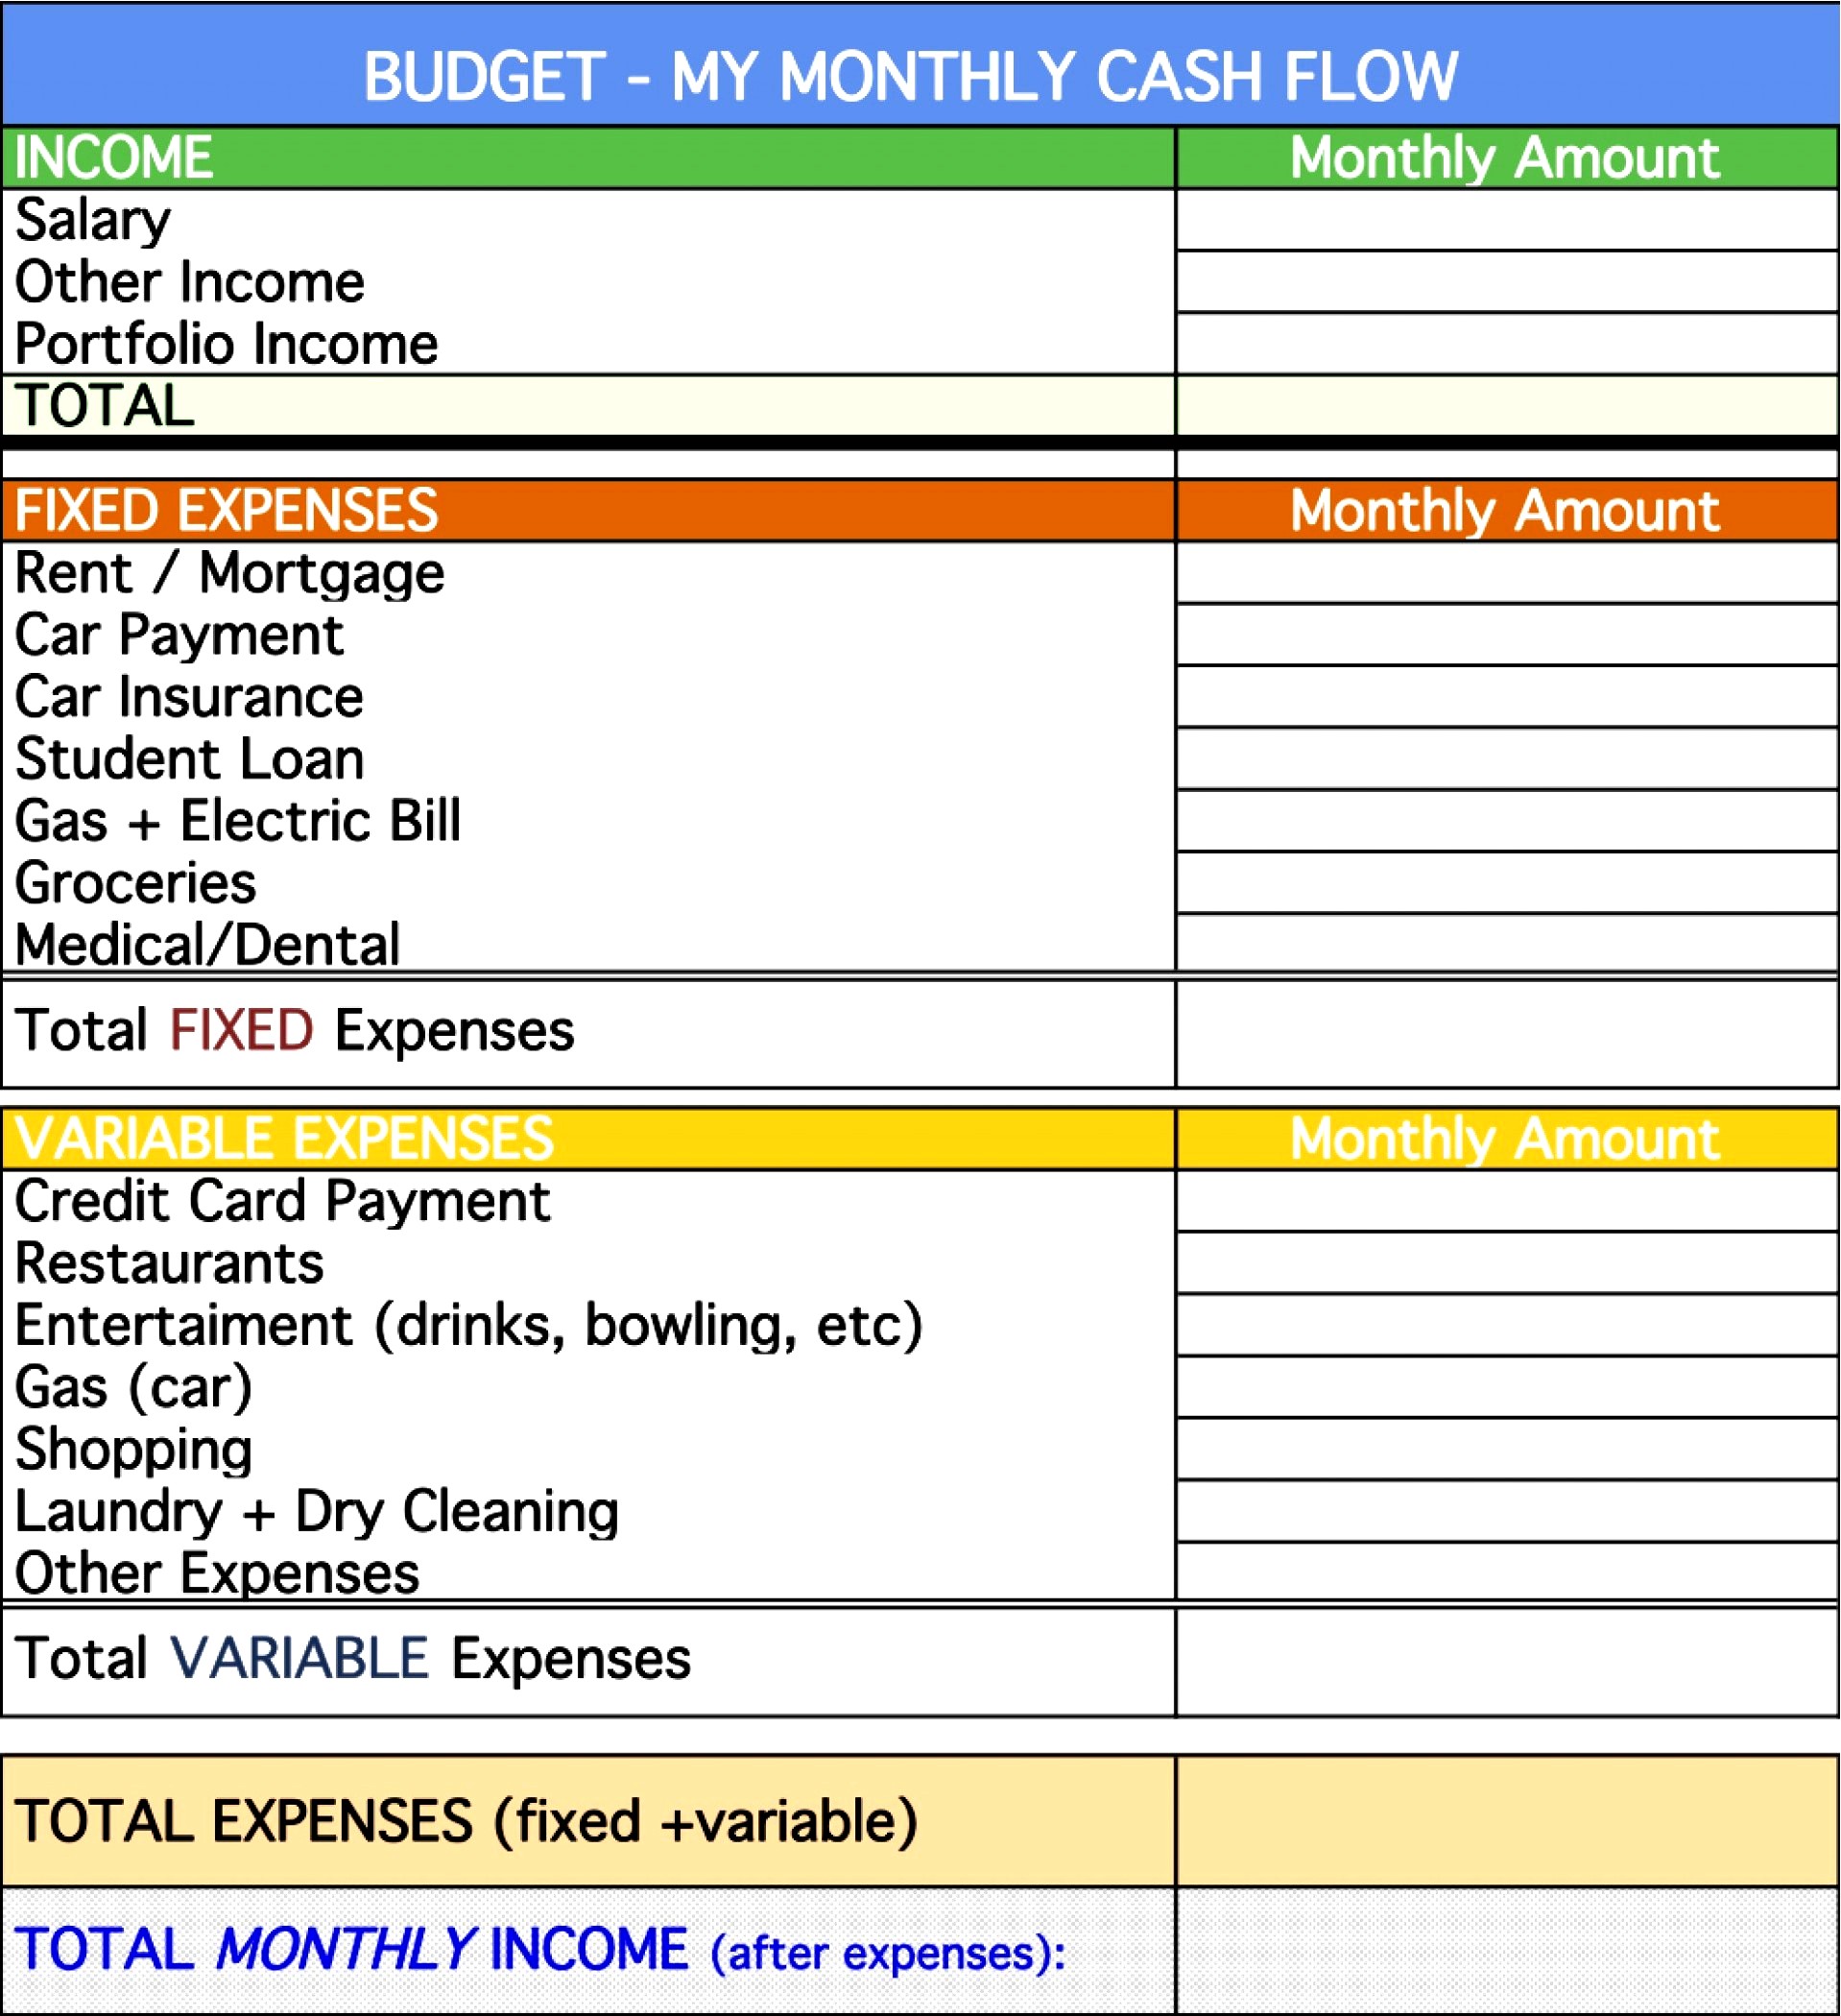 budgeting business plan example